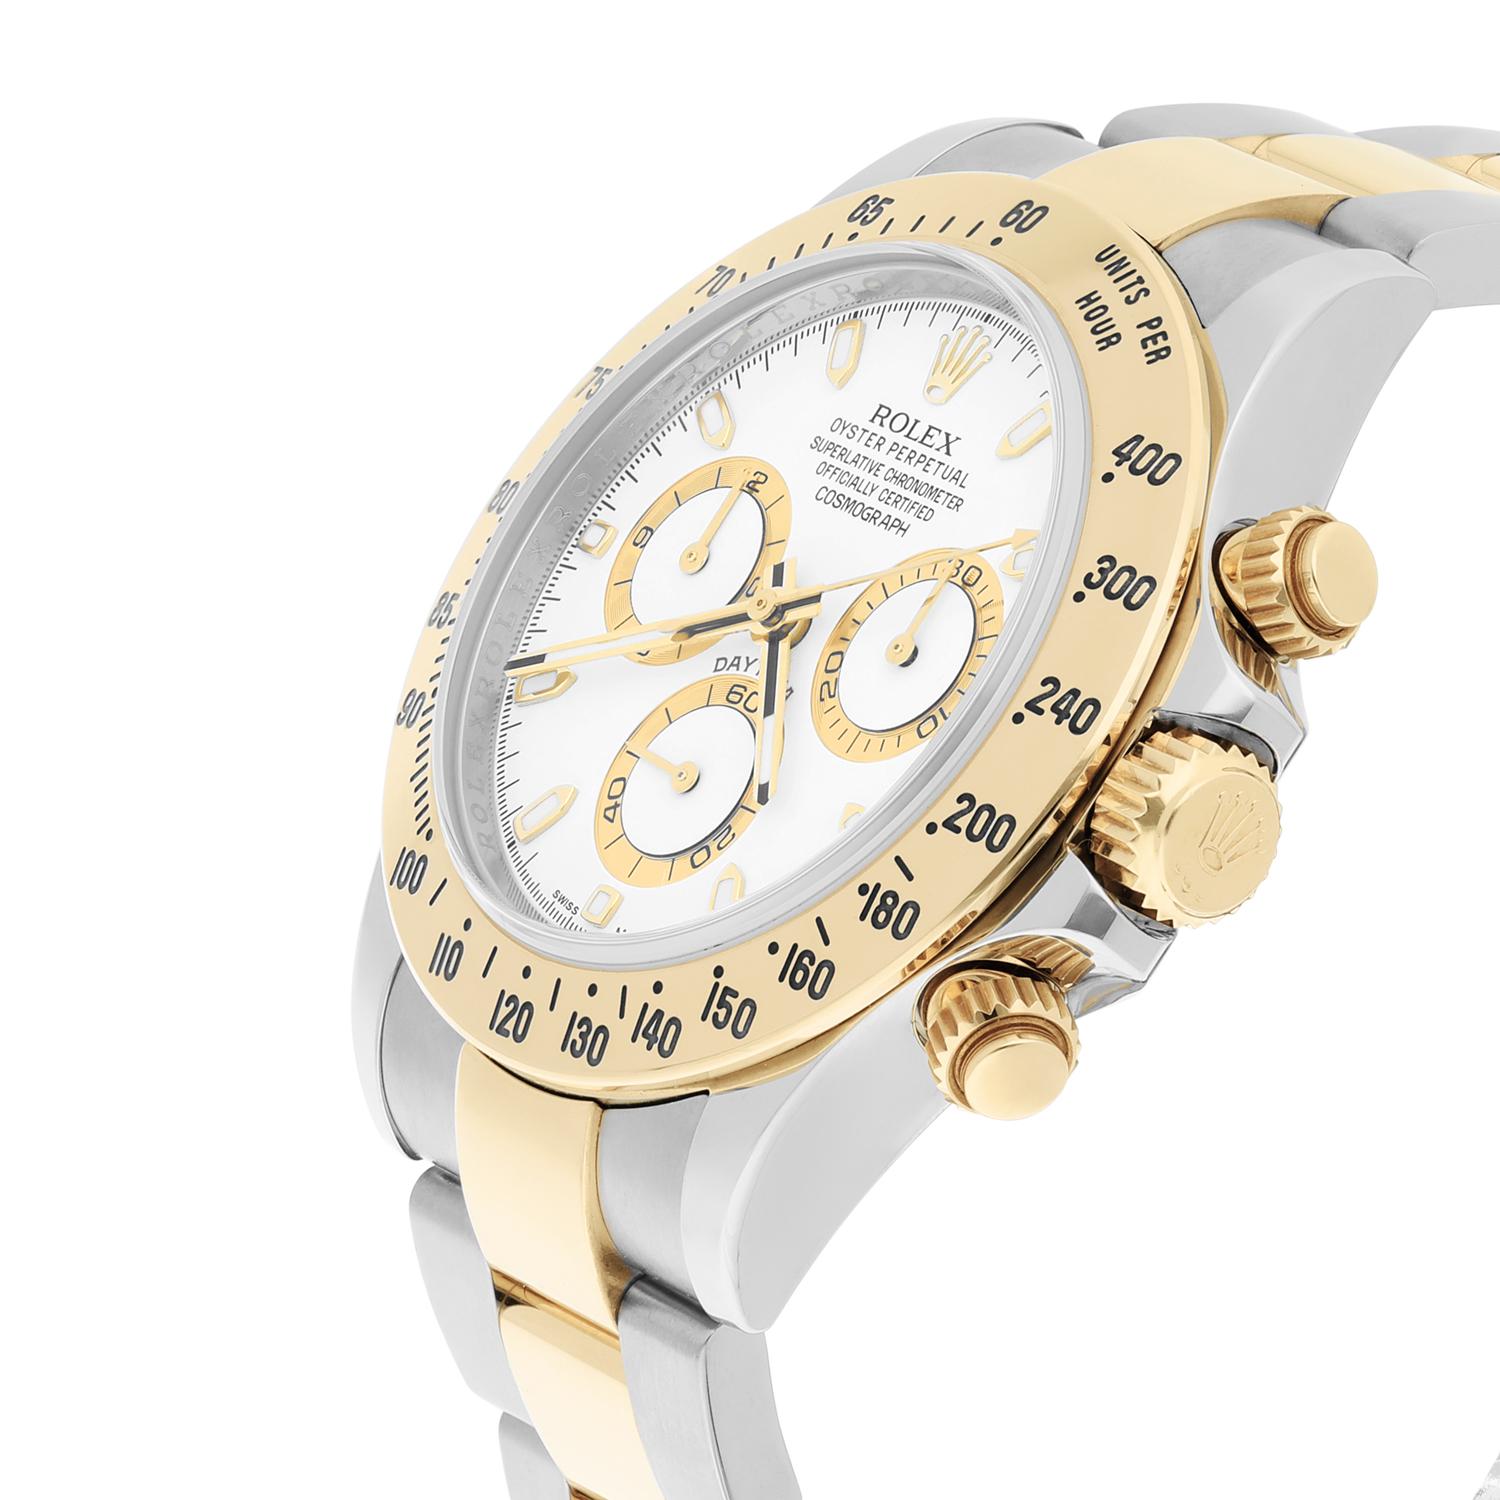 Modern Rolex Daytona Stainless Steel Yellow Gold White Dial Mens Watch 116523 Complete For Sale